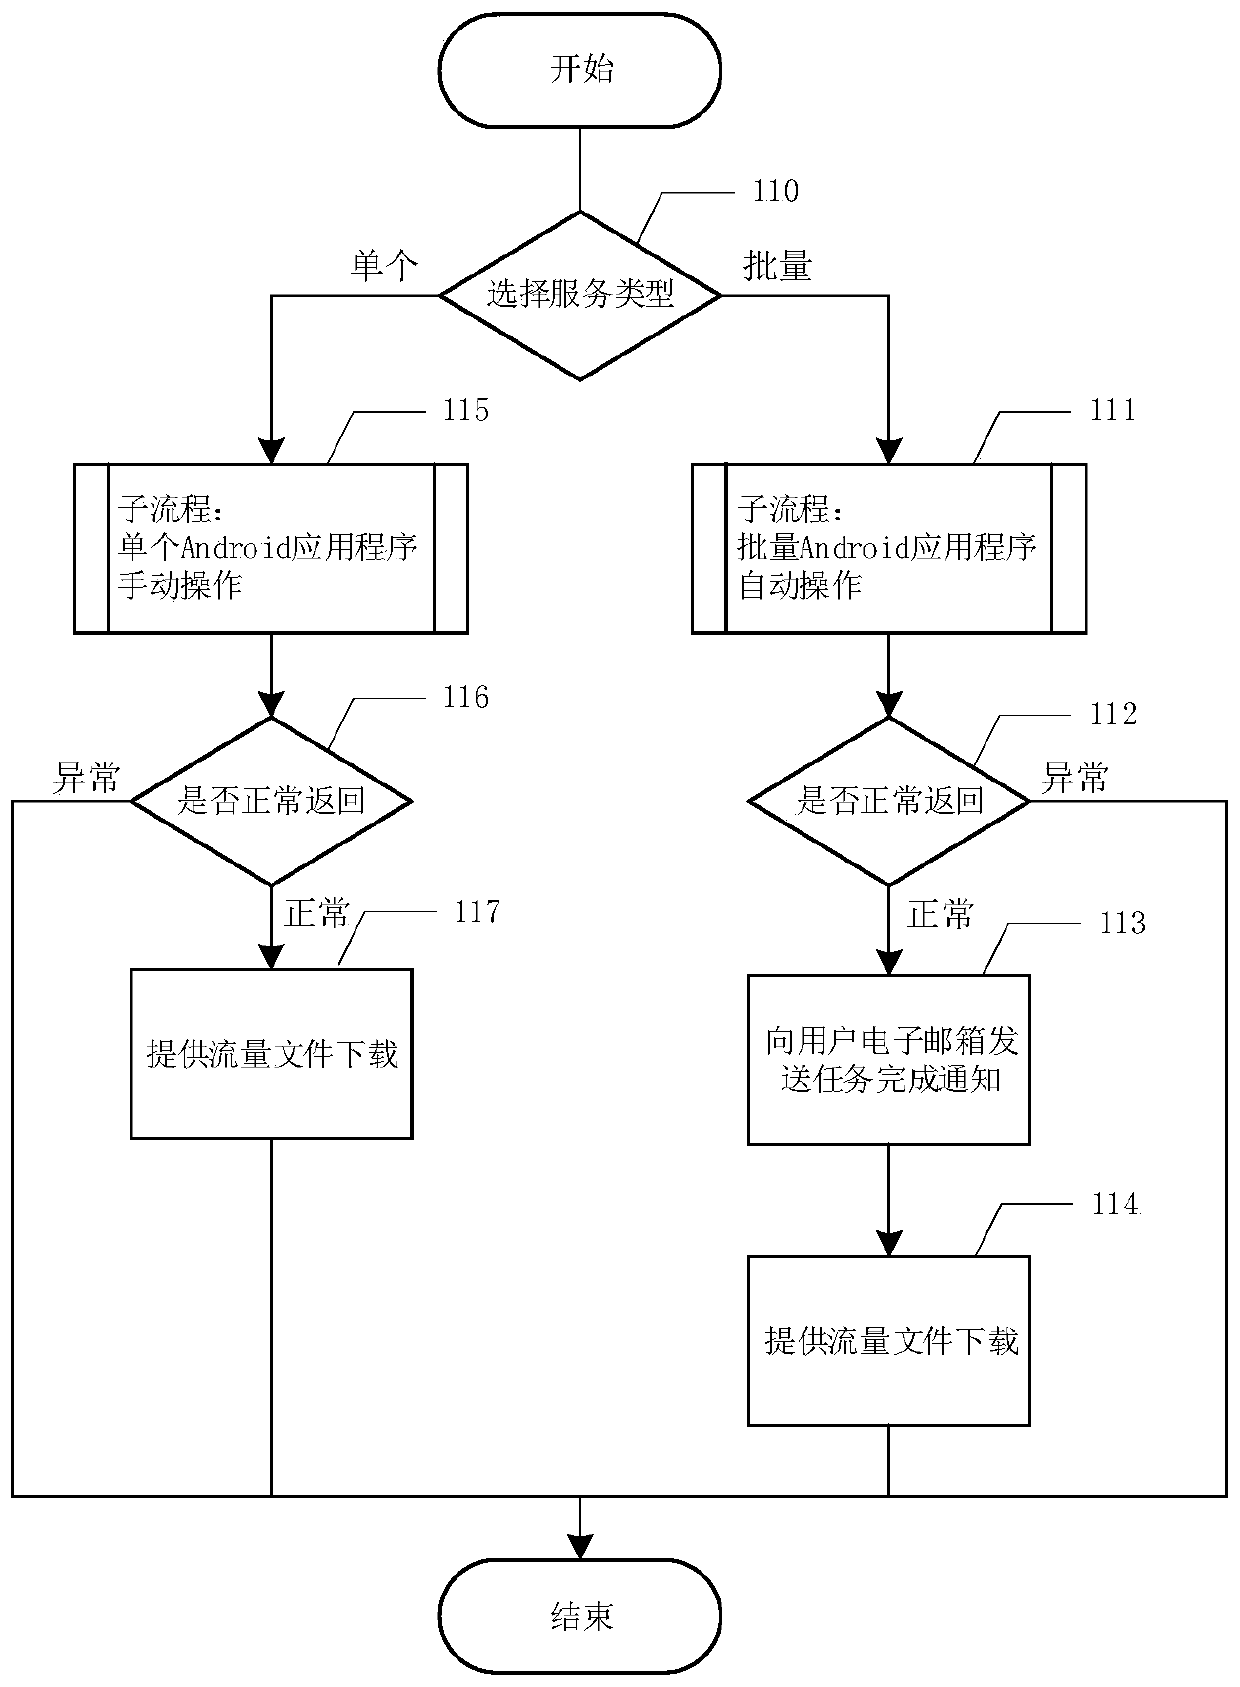 System and method for remote collection of android application network traffic